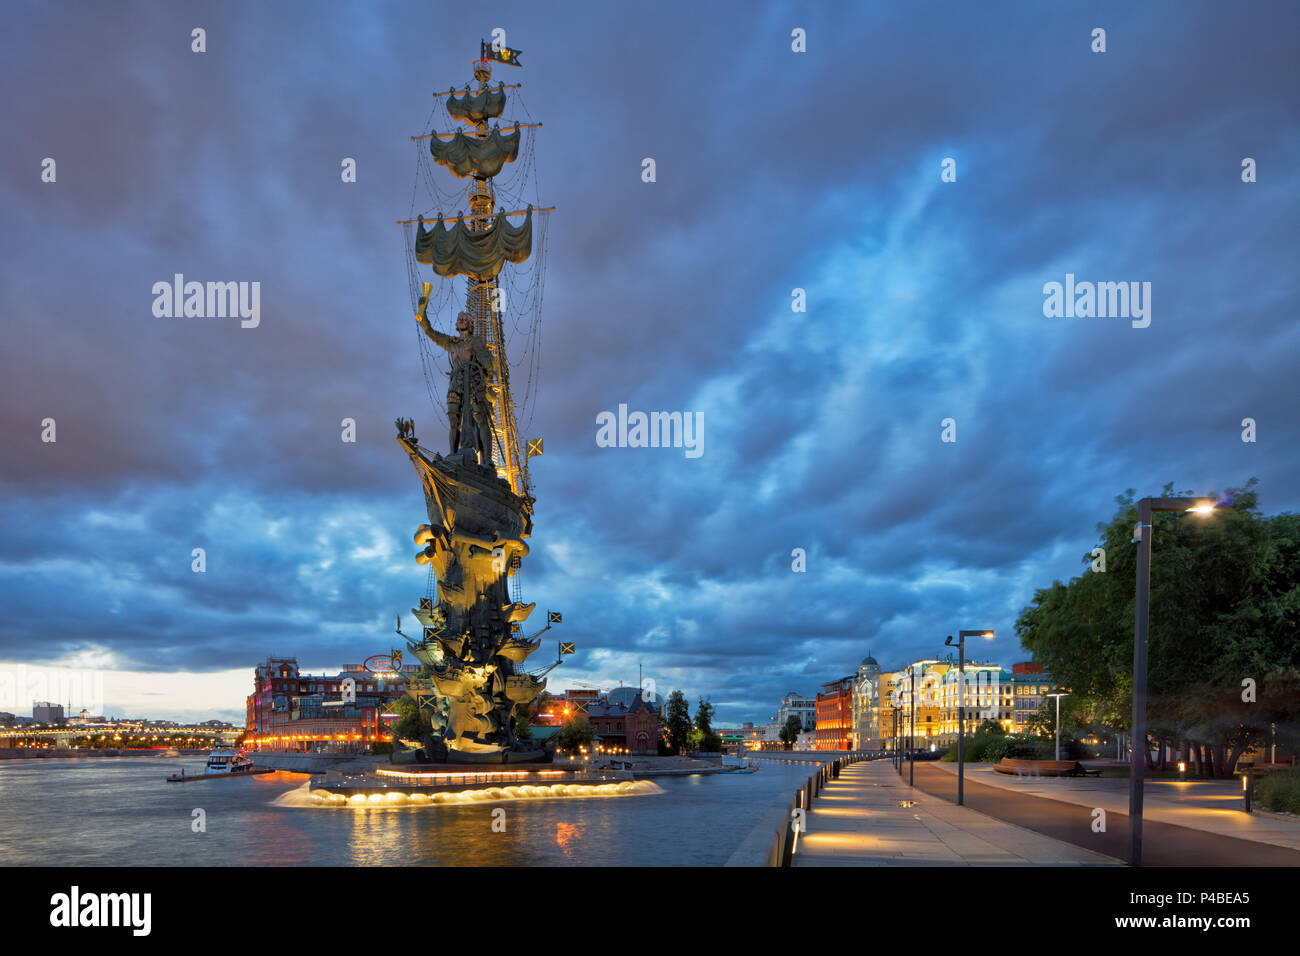 Peter the Great Statue, a 98-metre-high monument to Russian Tsar Peter I, illuminated at dusk. Krymskaya Embankment, Moscow, Russia. Stock Photo